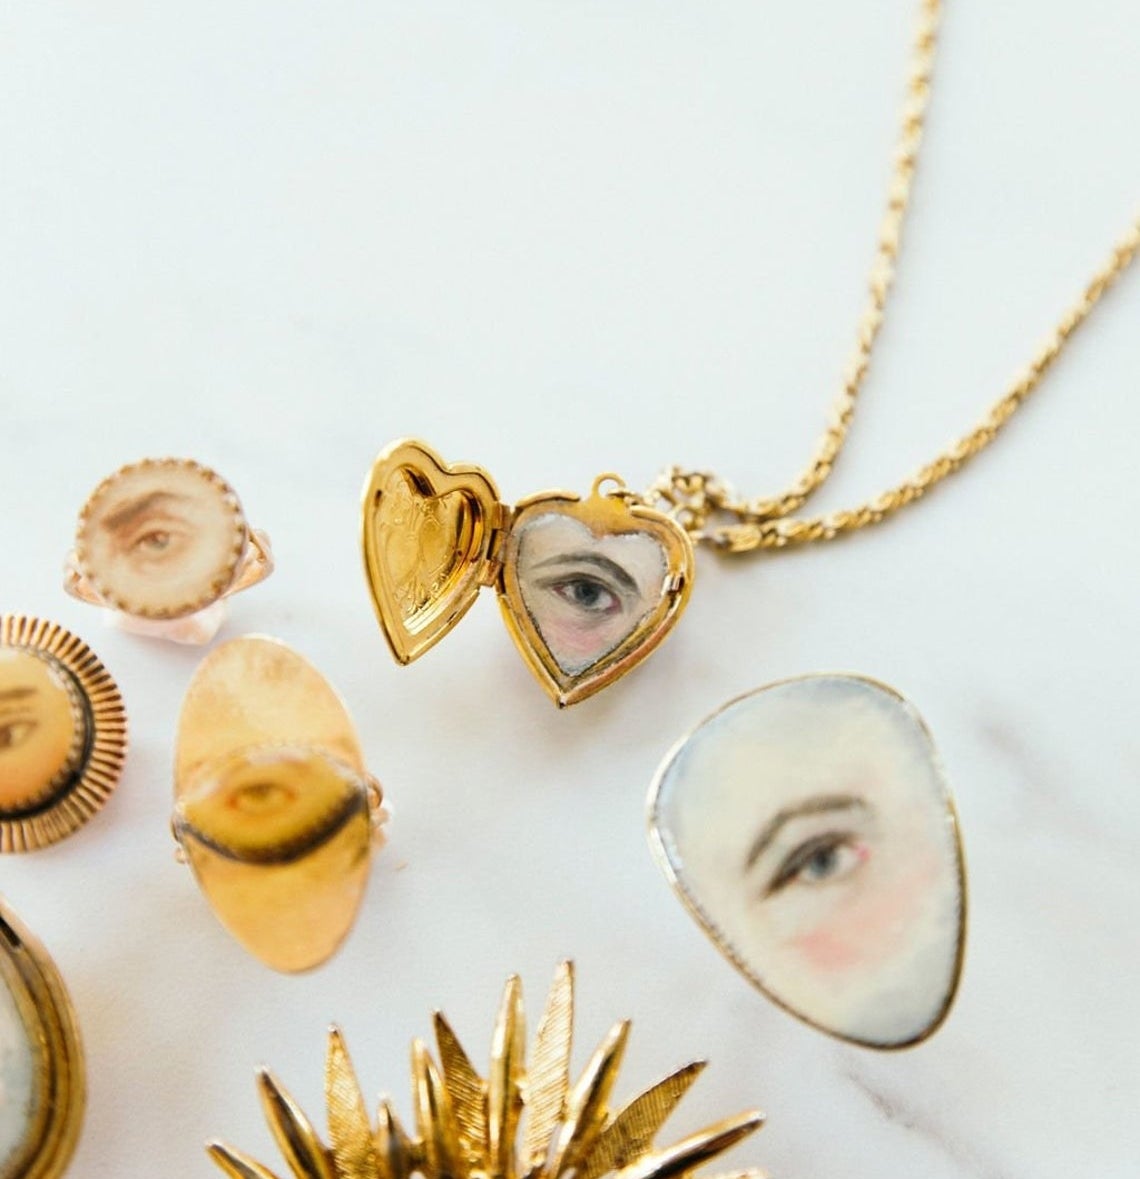 Several tiny gold necklaces, rings, and pendants with painted scenes and eyes 